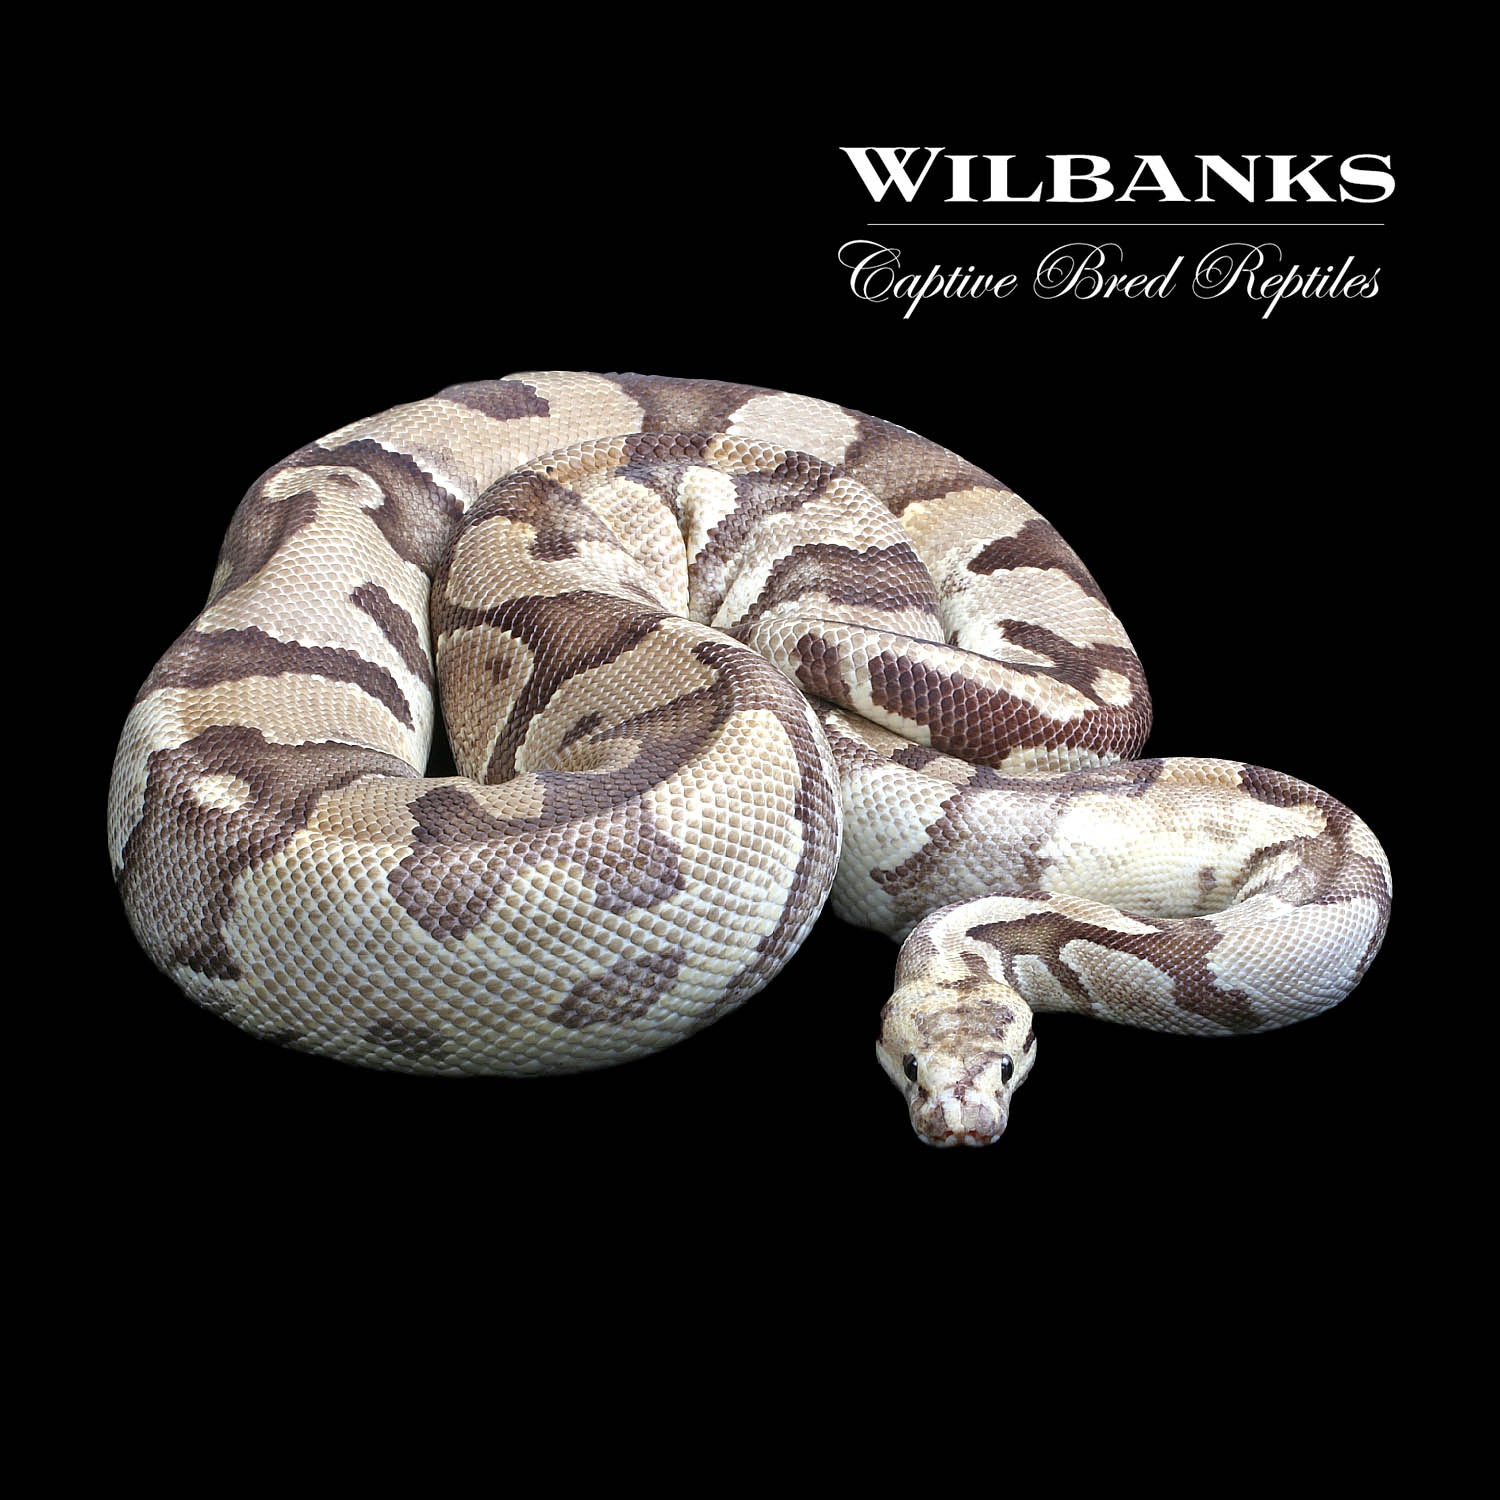 Fire Eclipse 100% Het, Clown Ball Python by Wilbanks Captive Bred Reptiles1